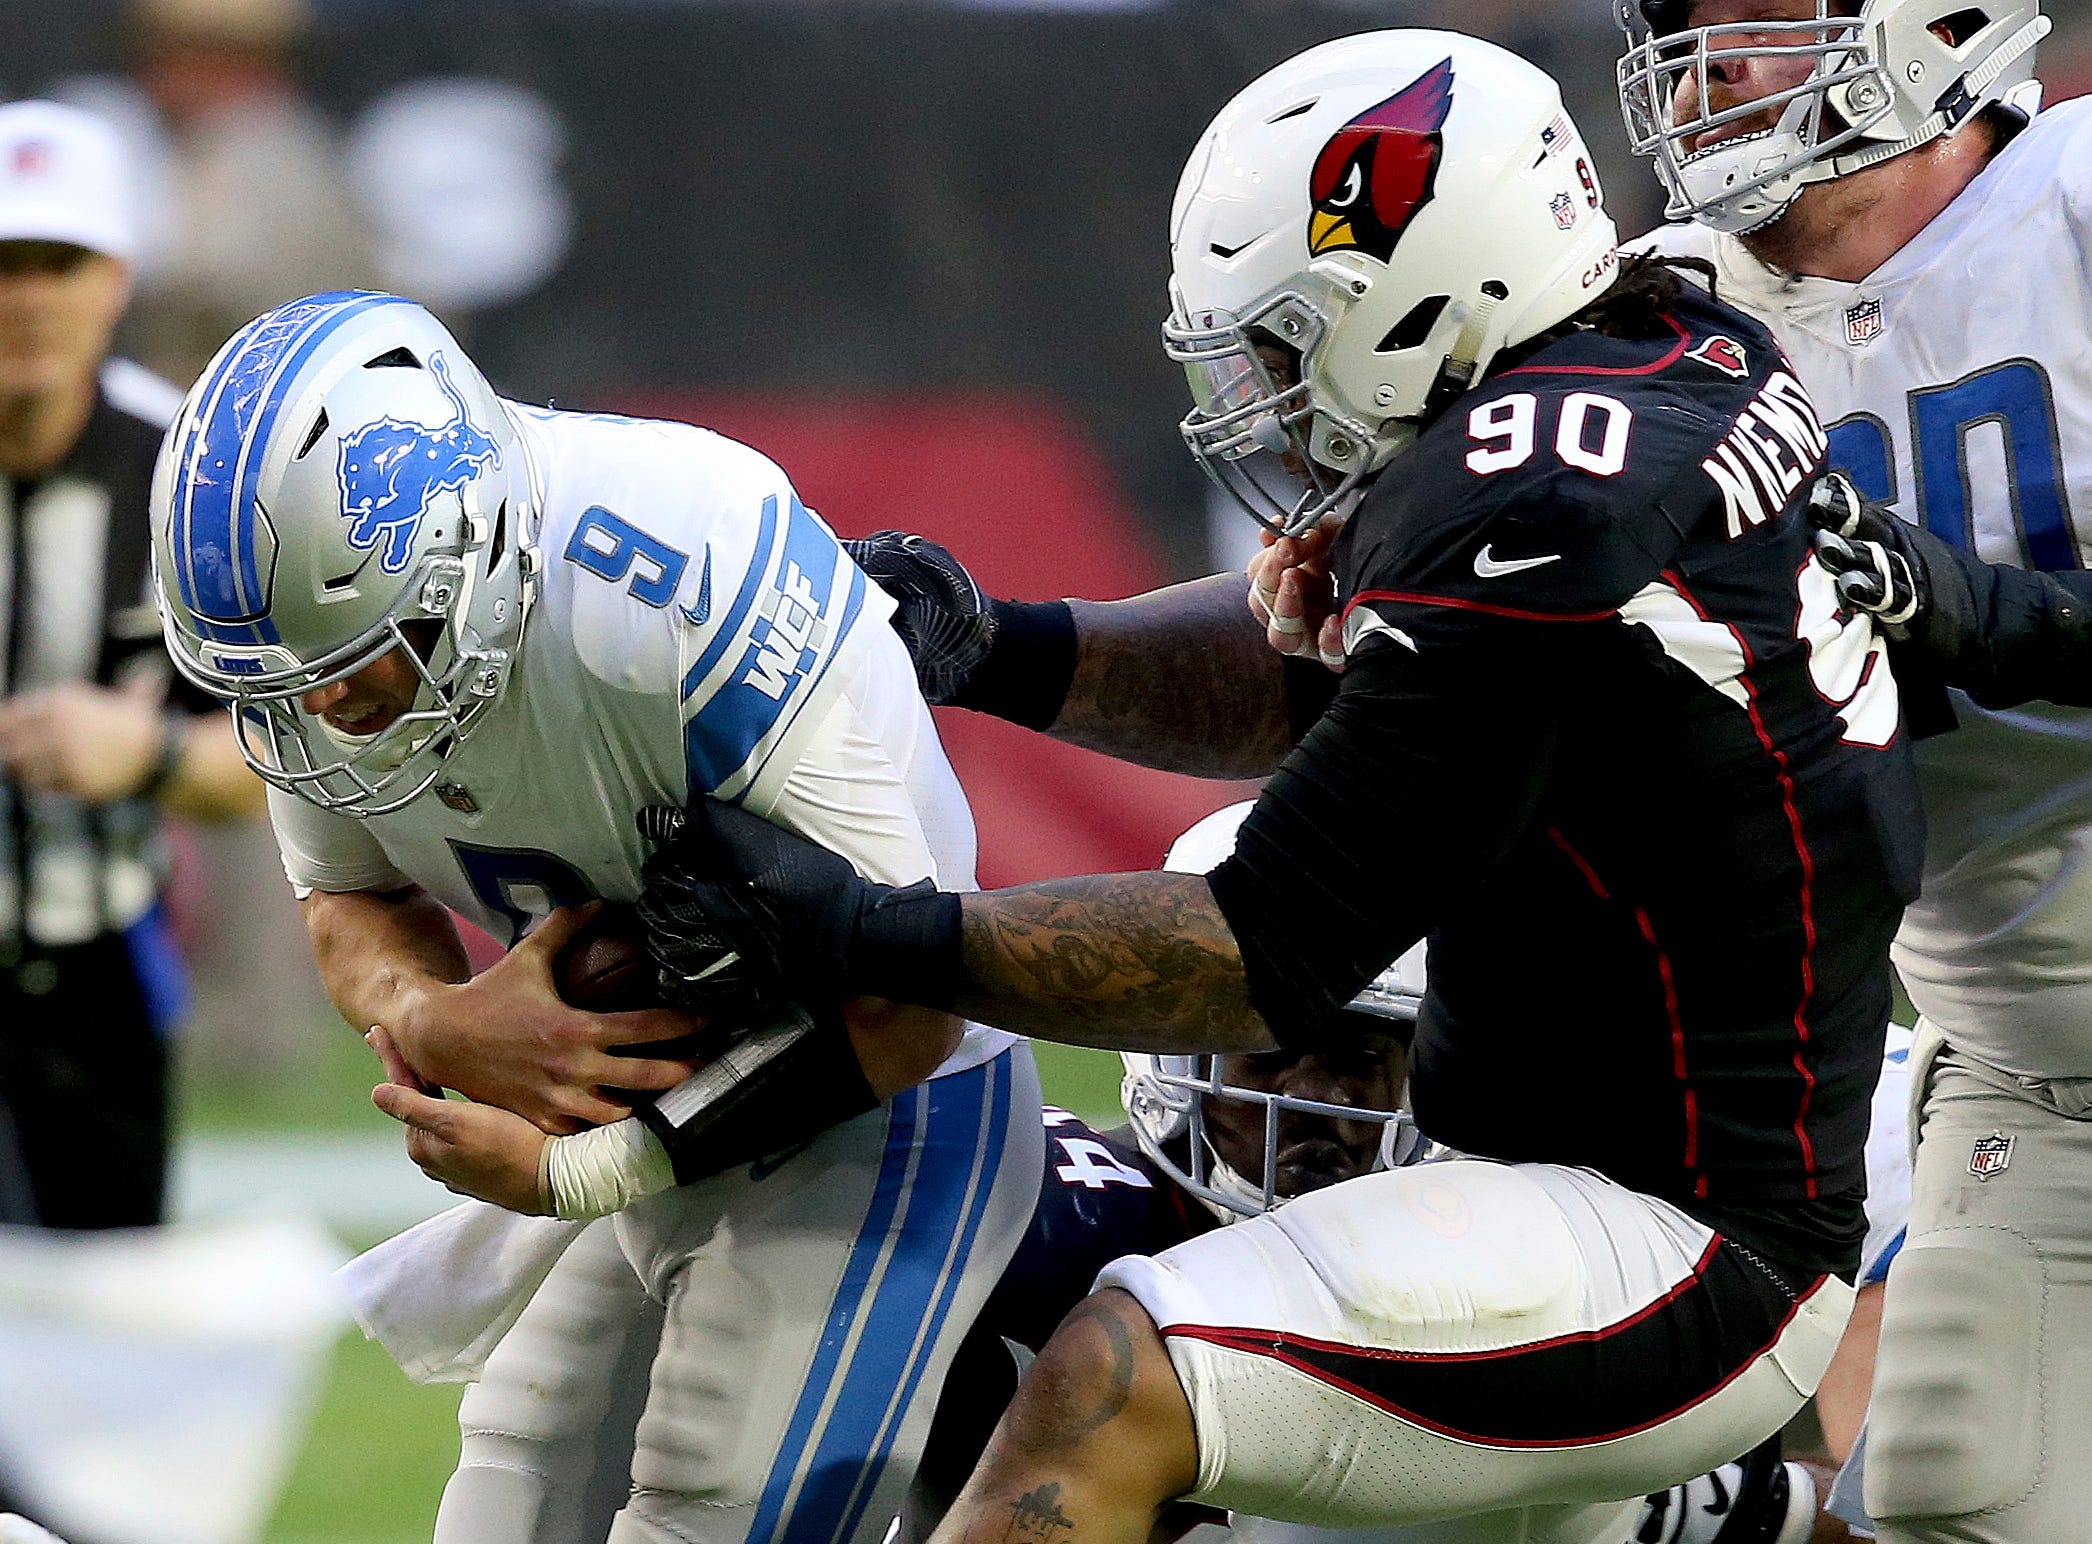 Cardinals' DT Nkemdiche goes on IR with knee injury